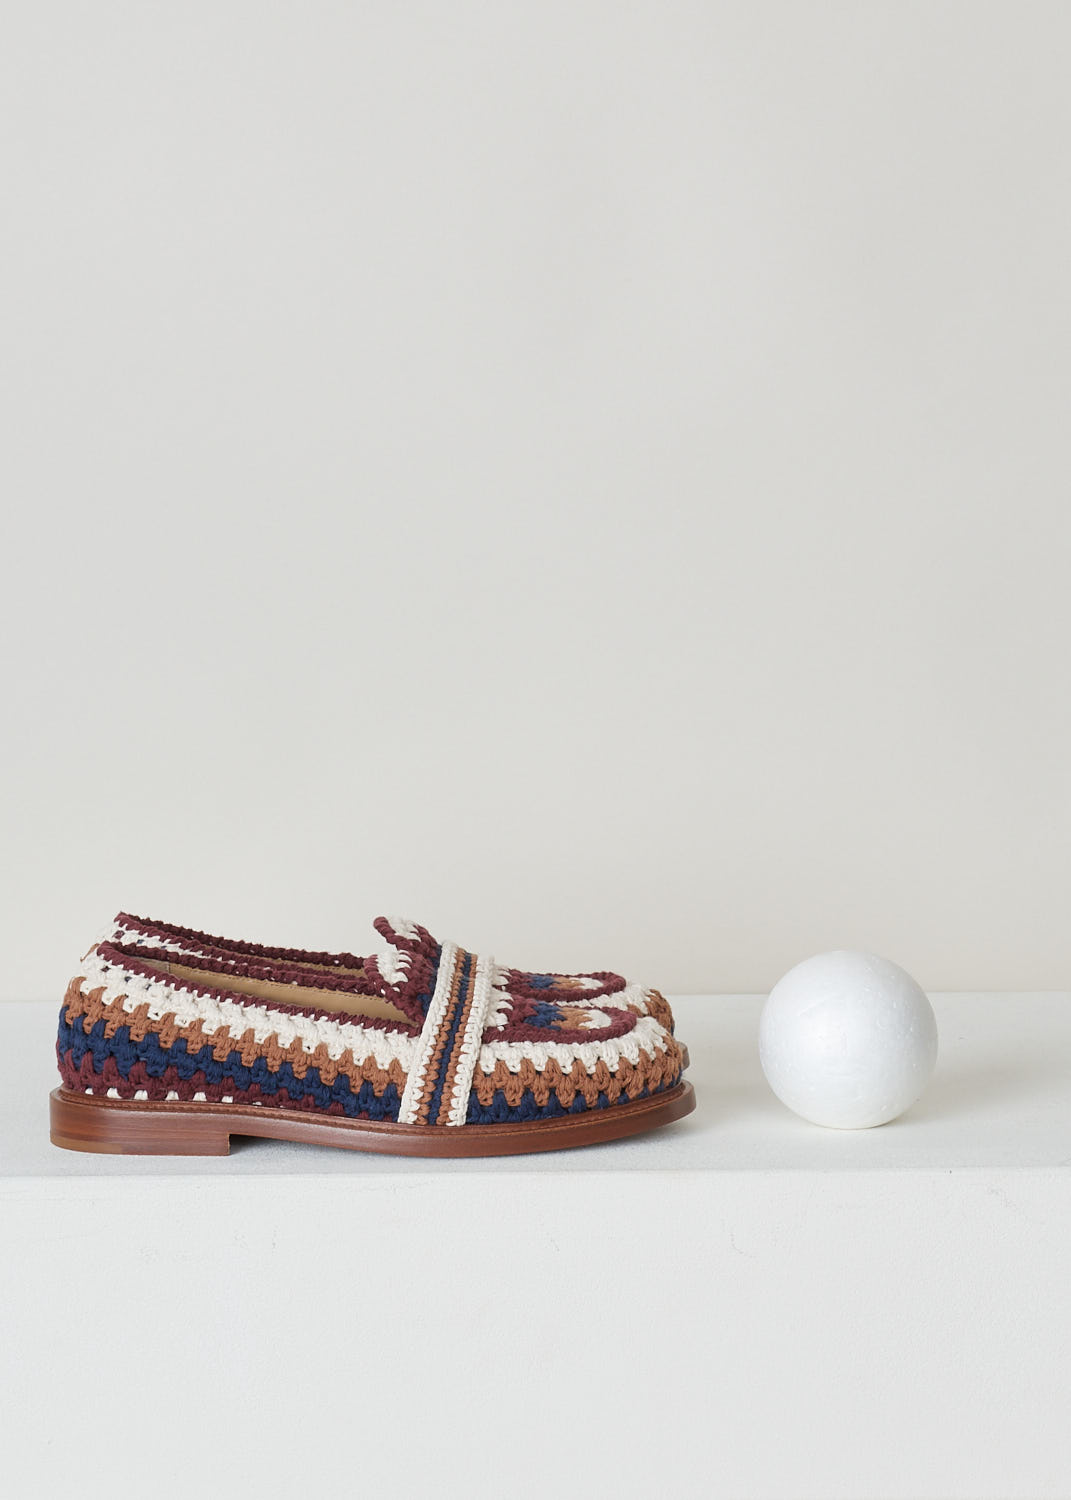 CHLOÃ‰, CROCHET MULTICOLOR LOAFERS, CHC22S584X04ZA_KALYA_FLAT_LOA_4ZA_MULTICOLOR_BLUE, Print, Side, These multicolored crochet loafers have a slip-on style with a round toe. The shoes have a sleek brown sole.
